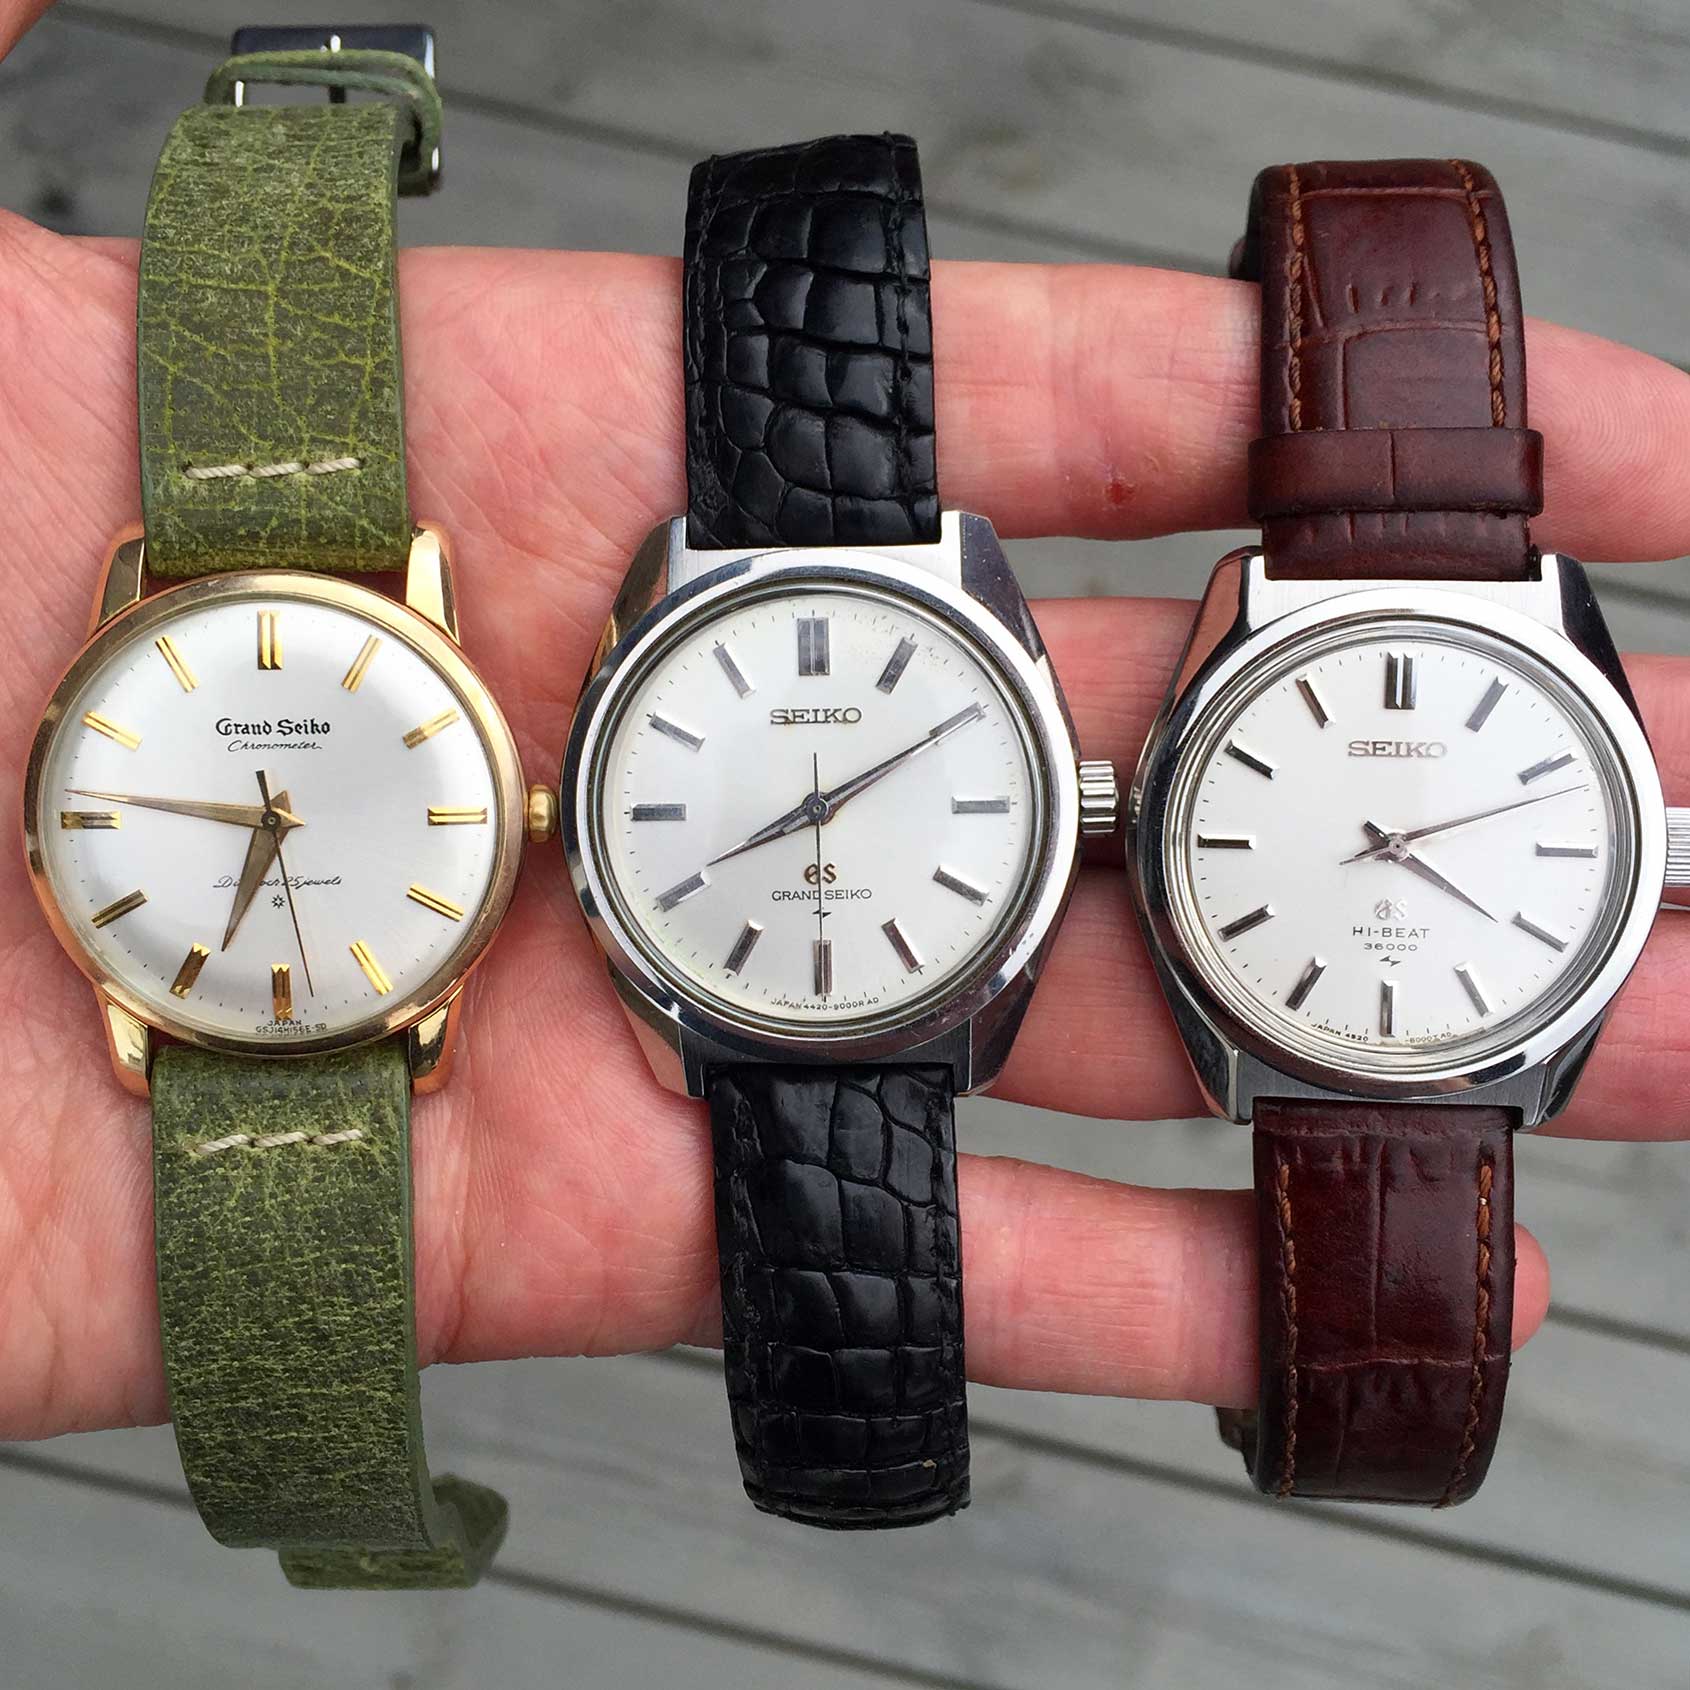 MY WATCH COLLECTION: Anders’s vintage Grand Seikos